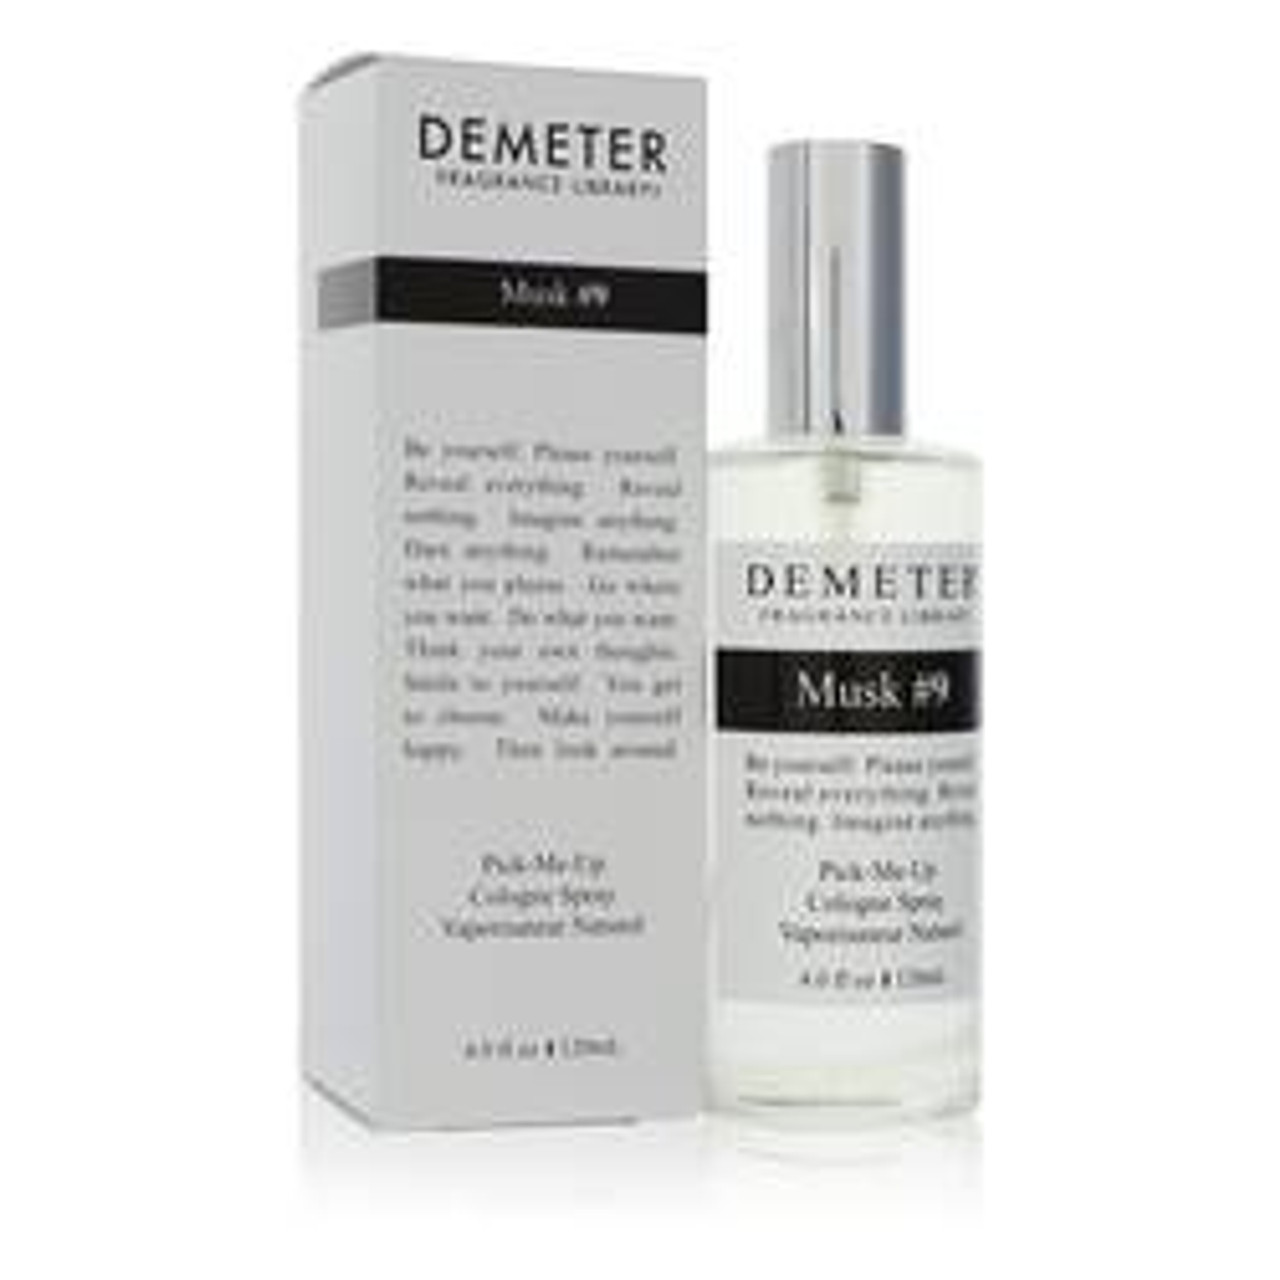 Demeter Musk #9 Cologne By Demeter Cologne Spray (Unisex)) 4 oz for Men - [From 79.50 - Choose pk Qty ] - *Ships from Miami